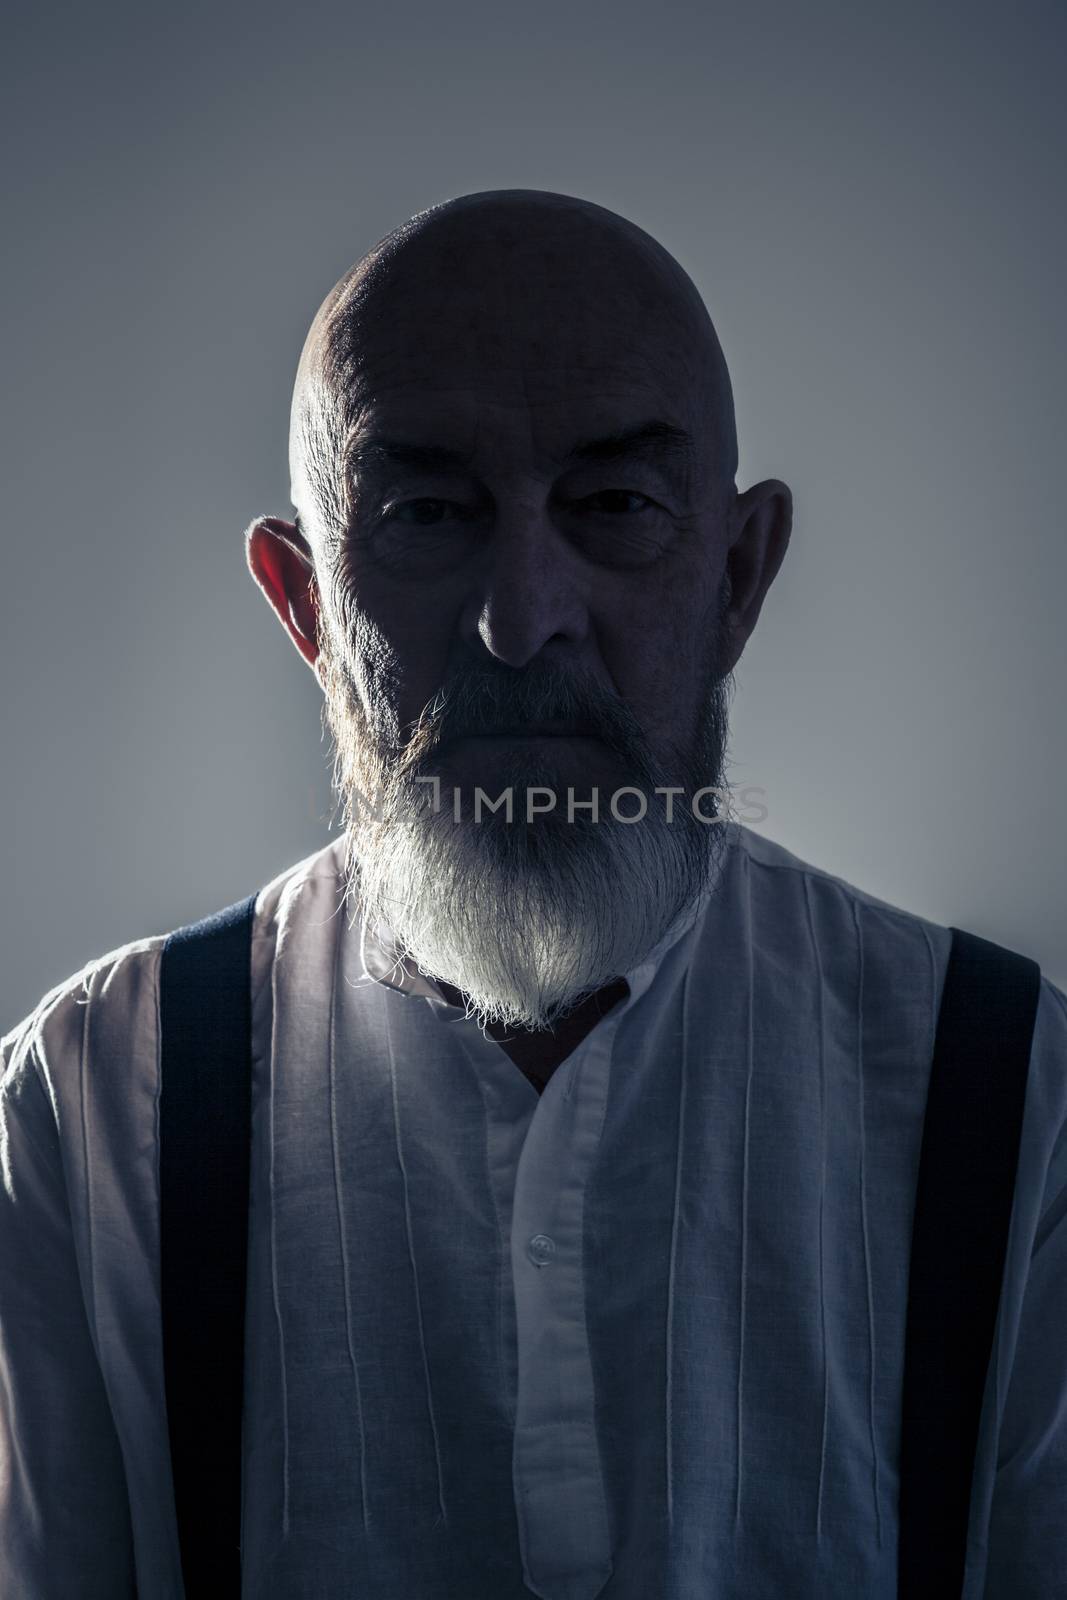 An image of an old man portrait